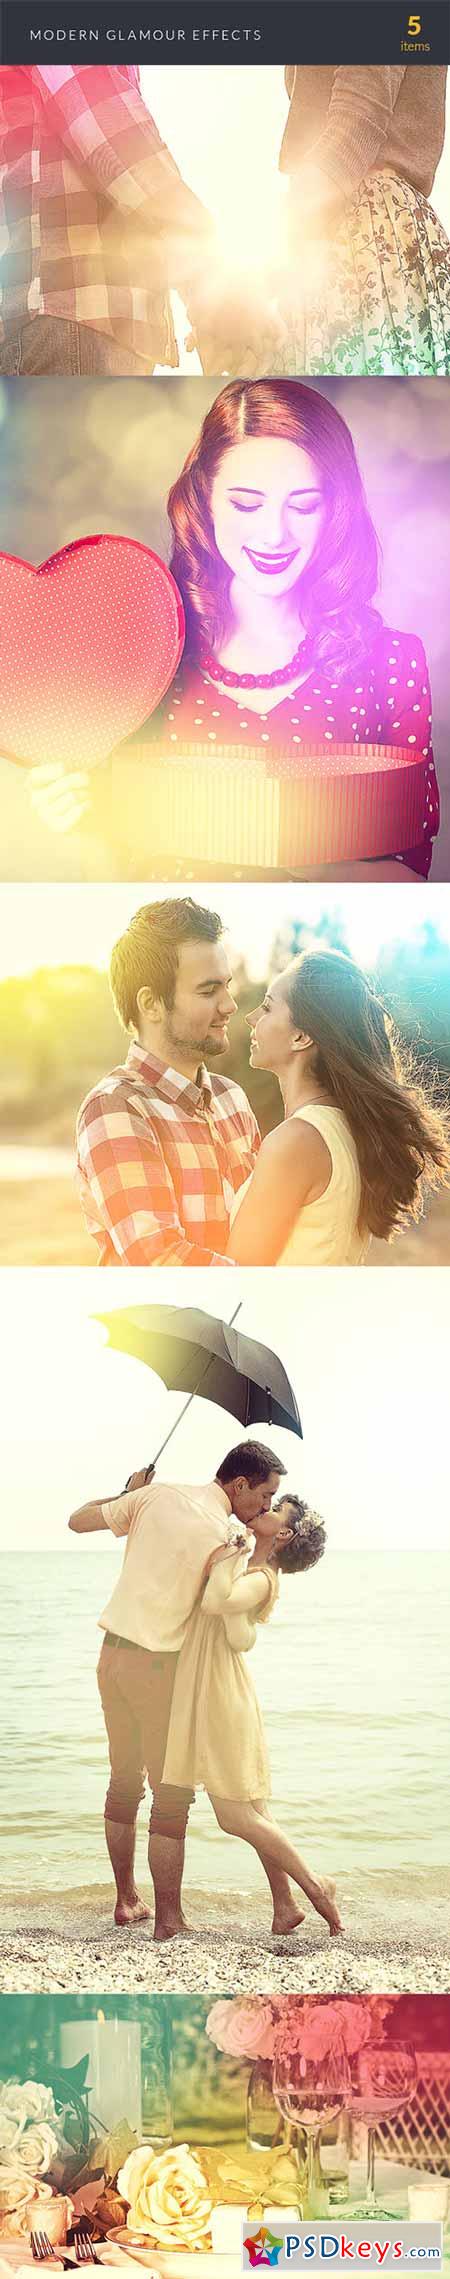 Modern Glamour Photo Effects Photoshop Actions